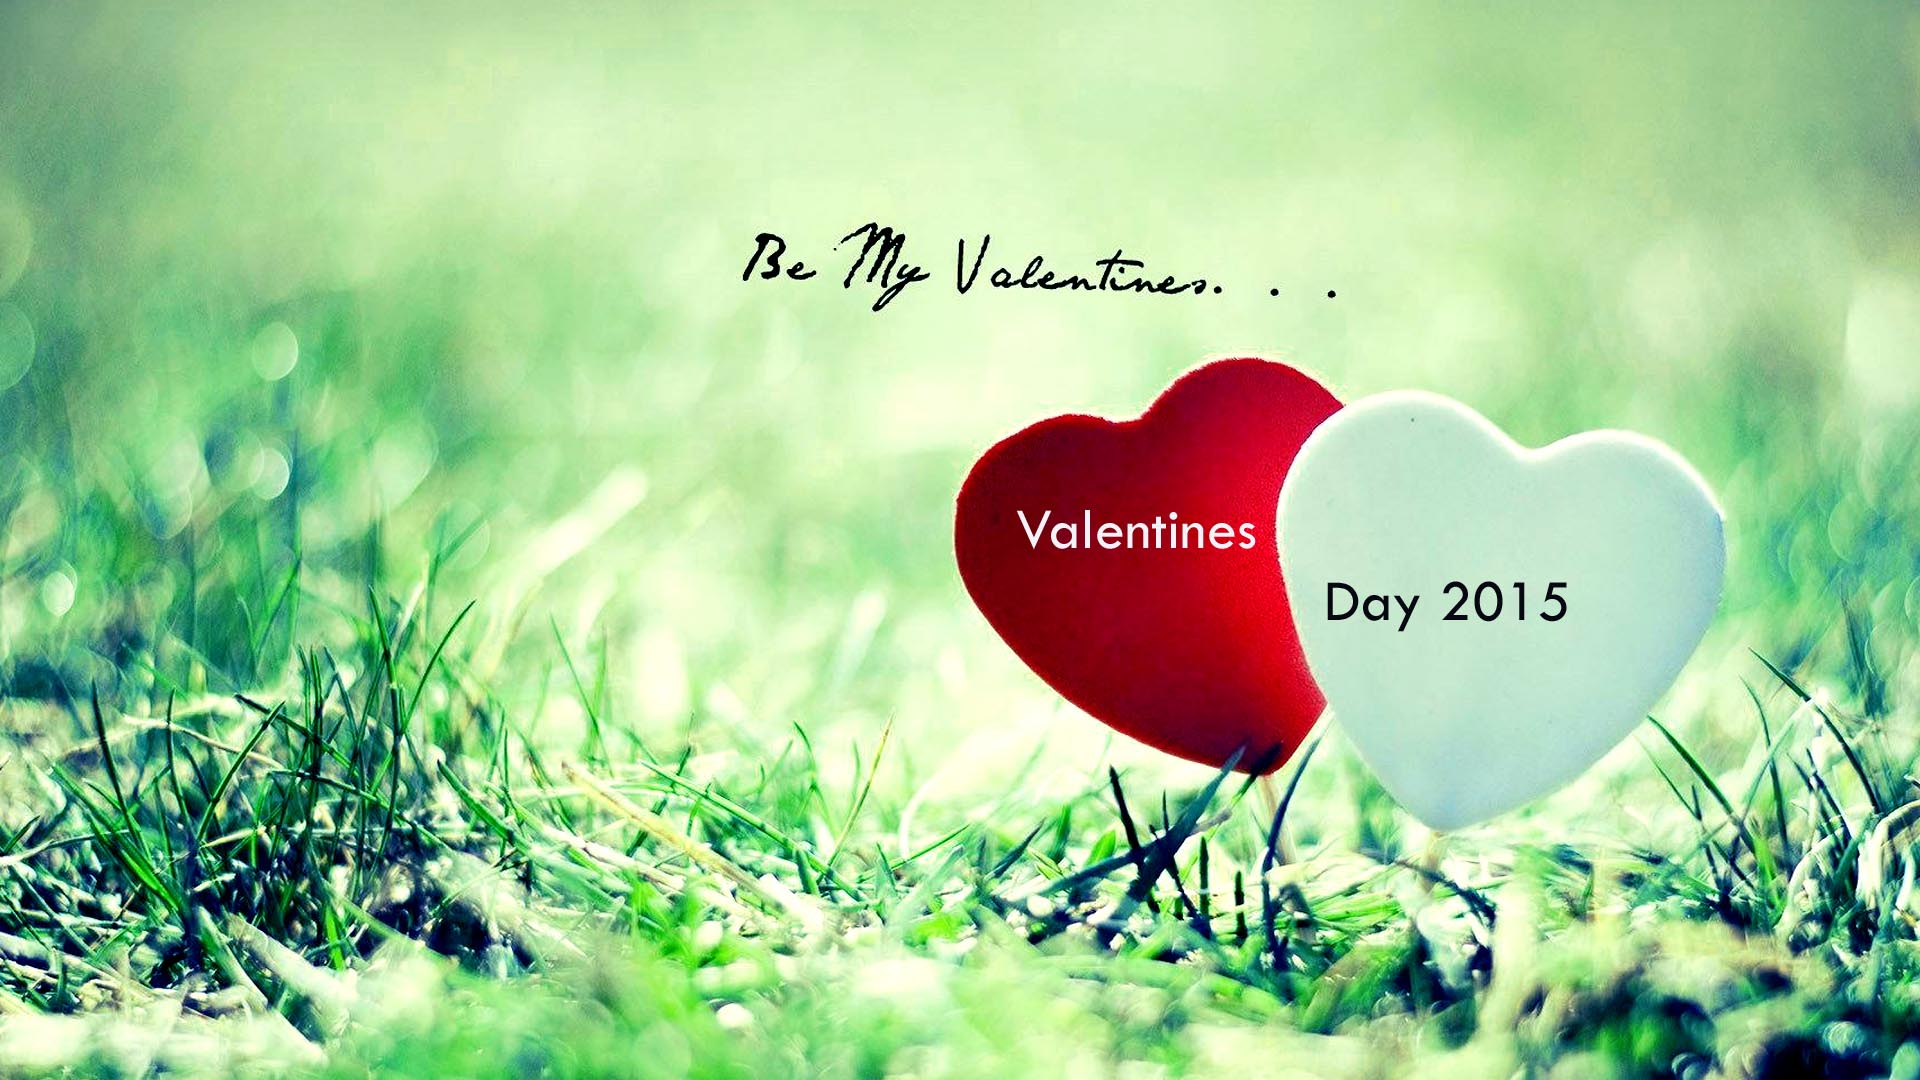 Happy valentines day status , images ,wallpapers , greeting card loyalty  free - Web शायरी